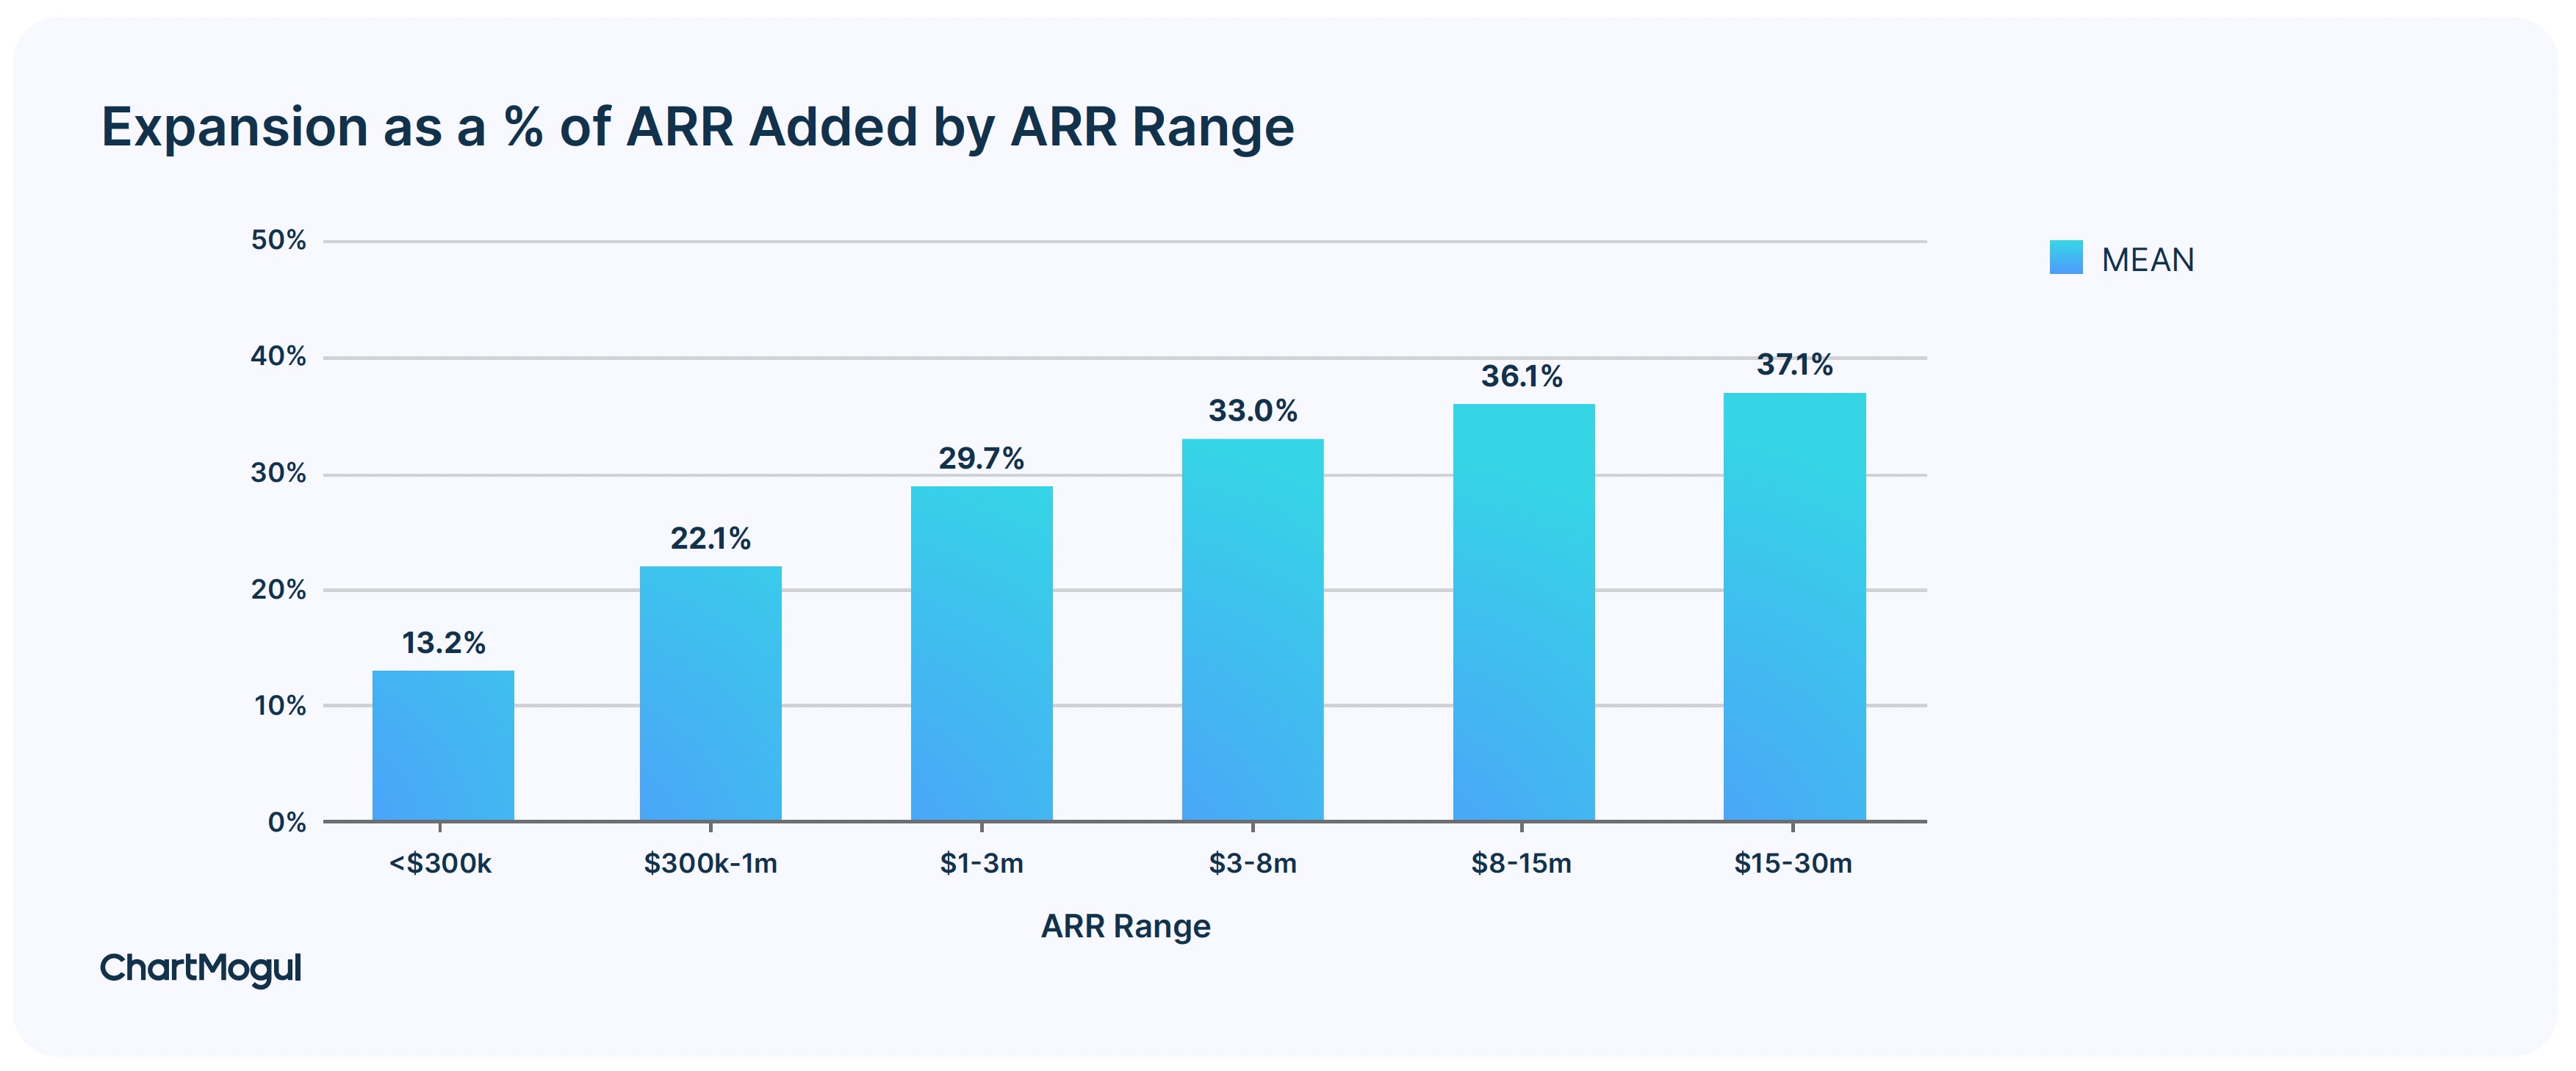 Expansion as a % of ARR added by ARR range.